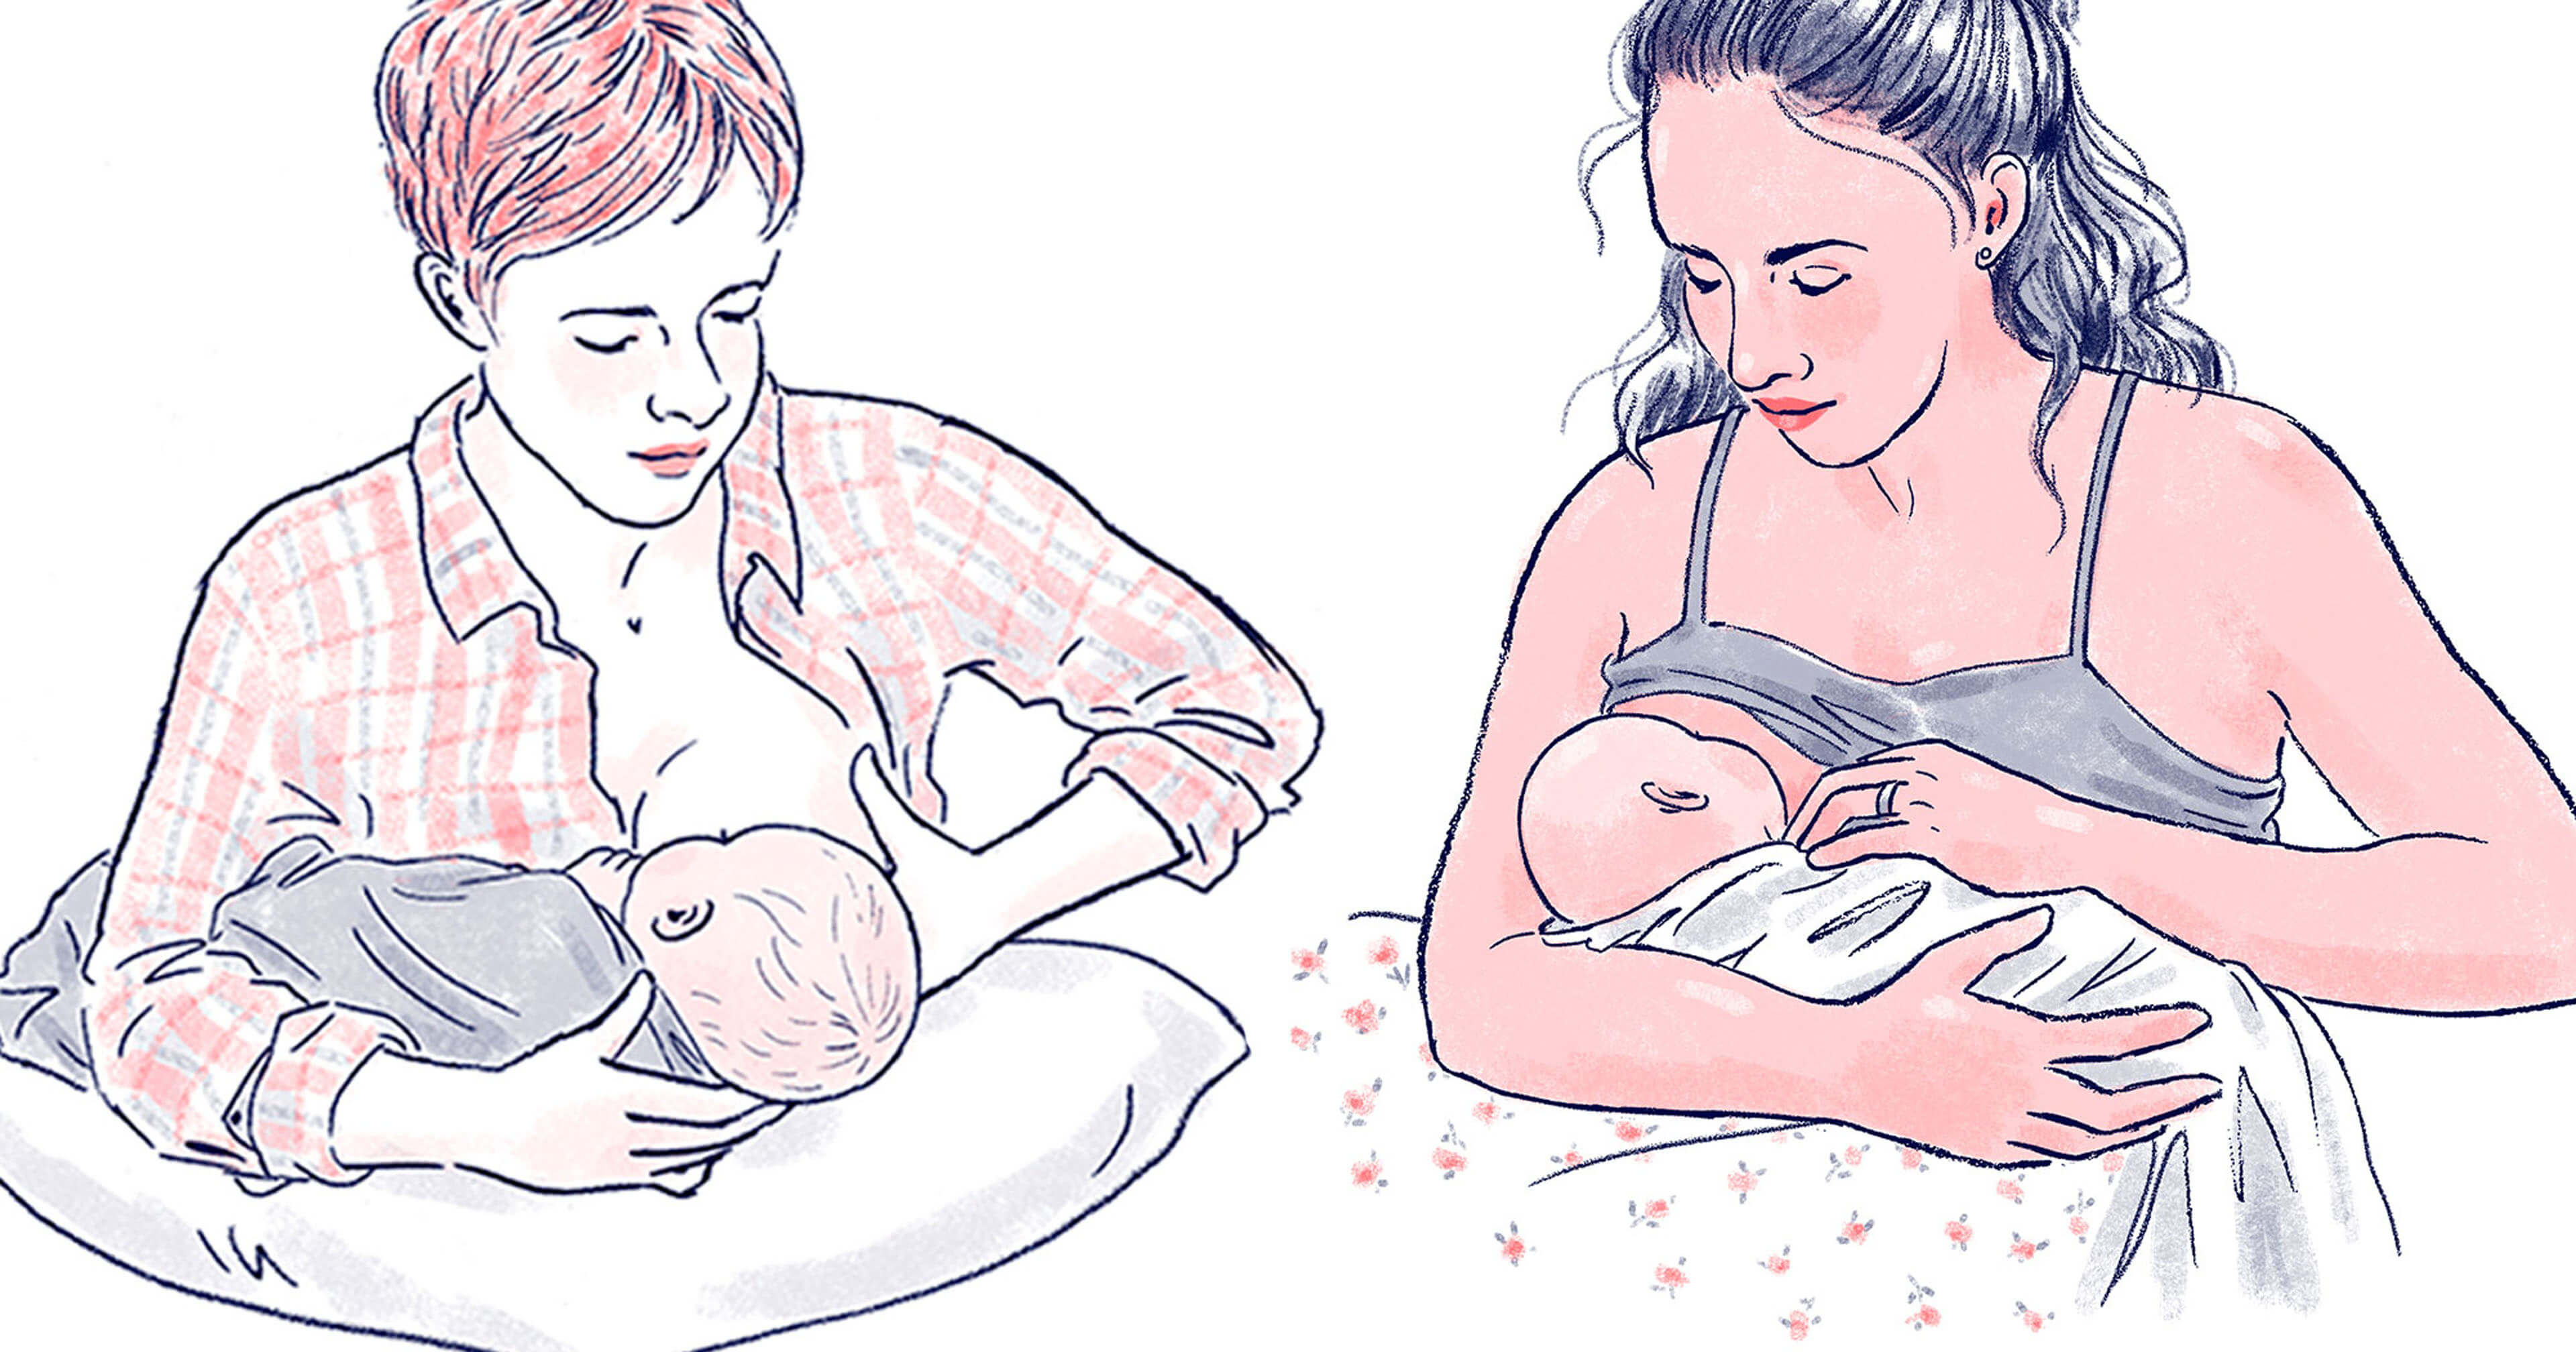 https://www.mamanatural.com/wp-content/uploads/Breastfeeding-Positions-Have-You-Tried-Them-All-baby-post-by-Mama-Natural.jpg